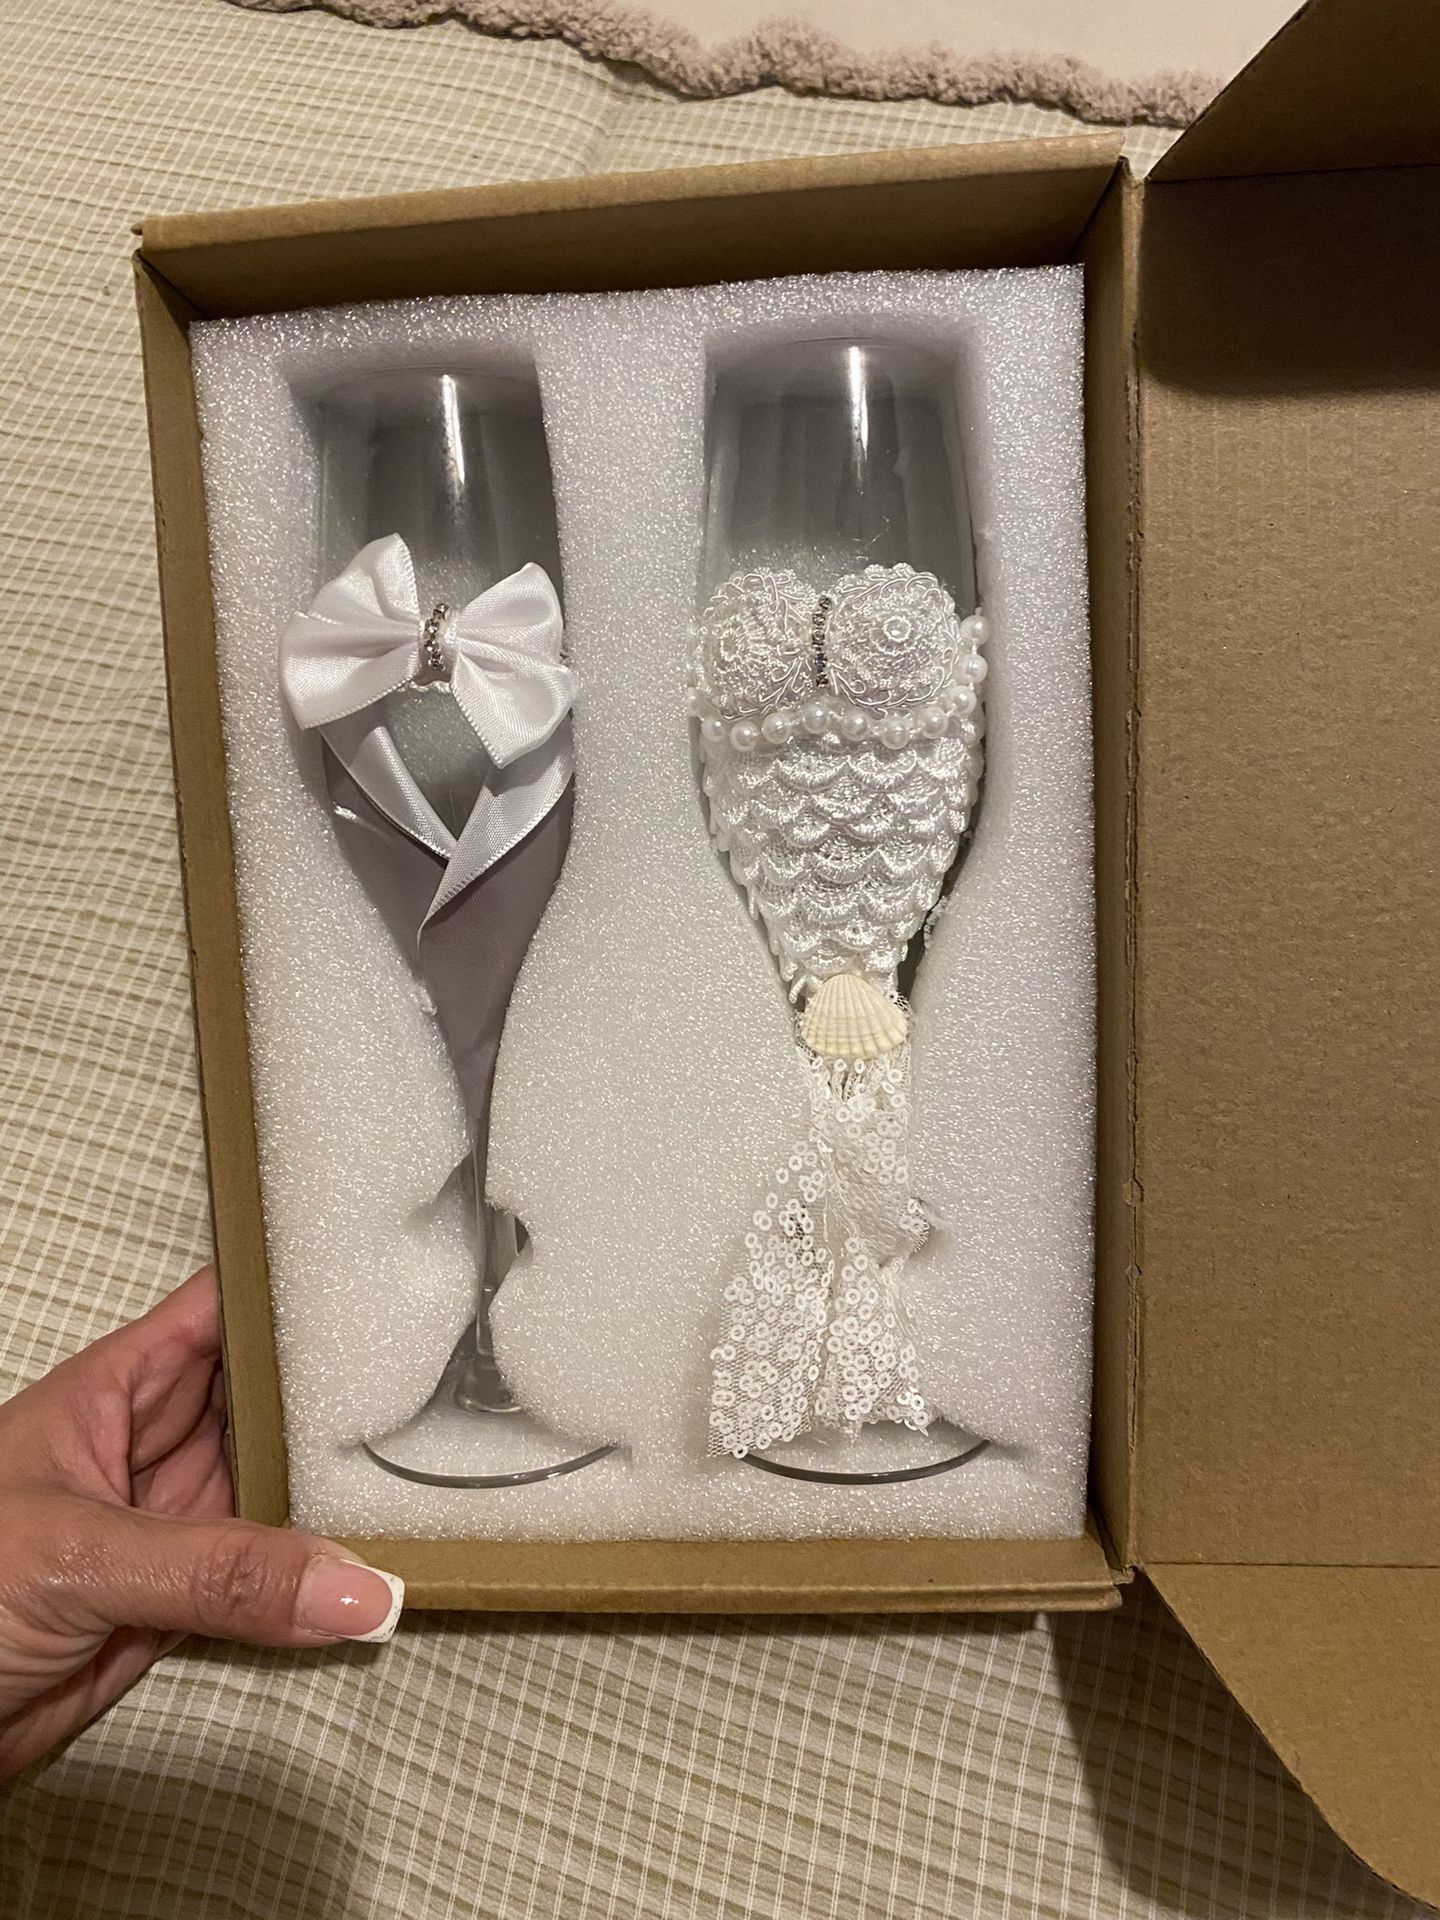 Bride and Groom Wedding Champagne Glasses 